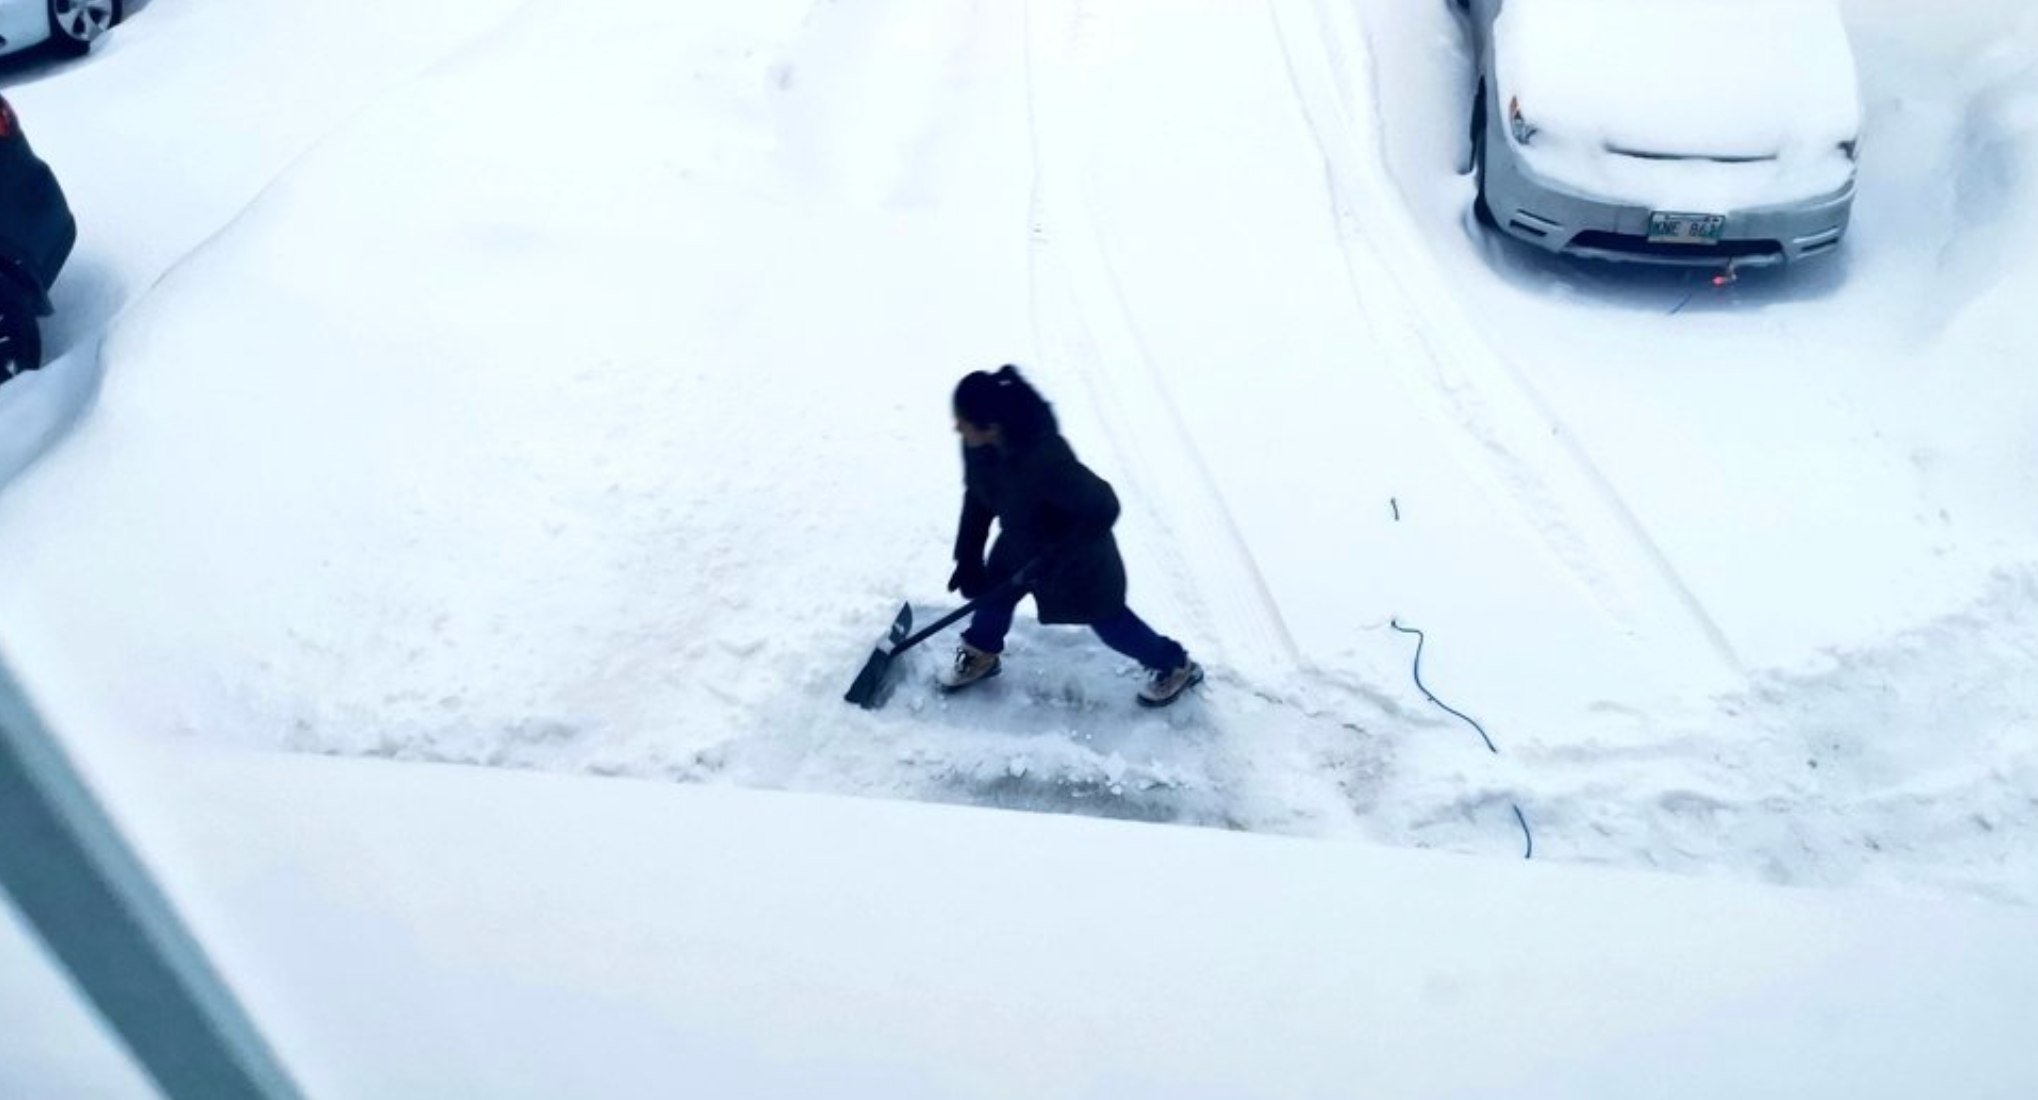 Jon Reyes shared a photo of his wife shovelling snow in their driveway